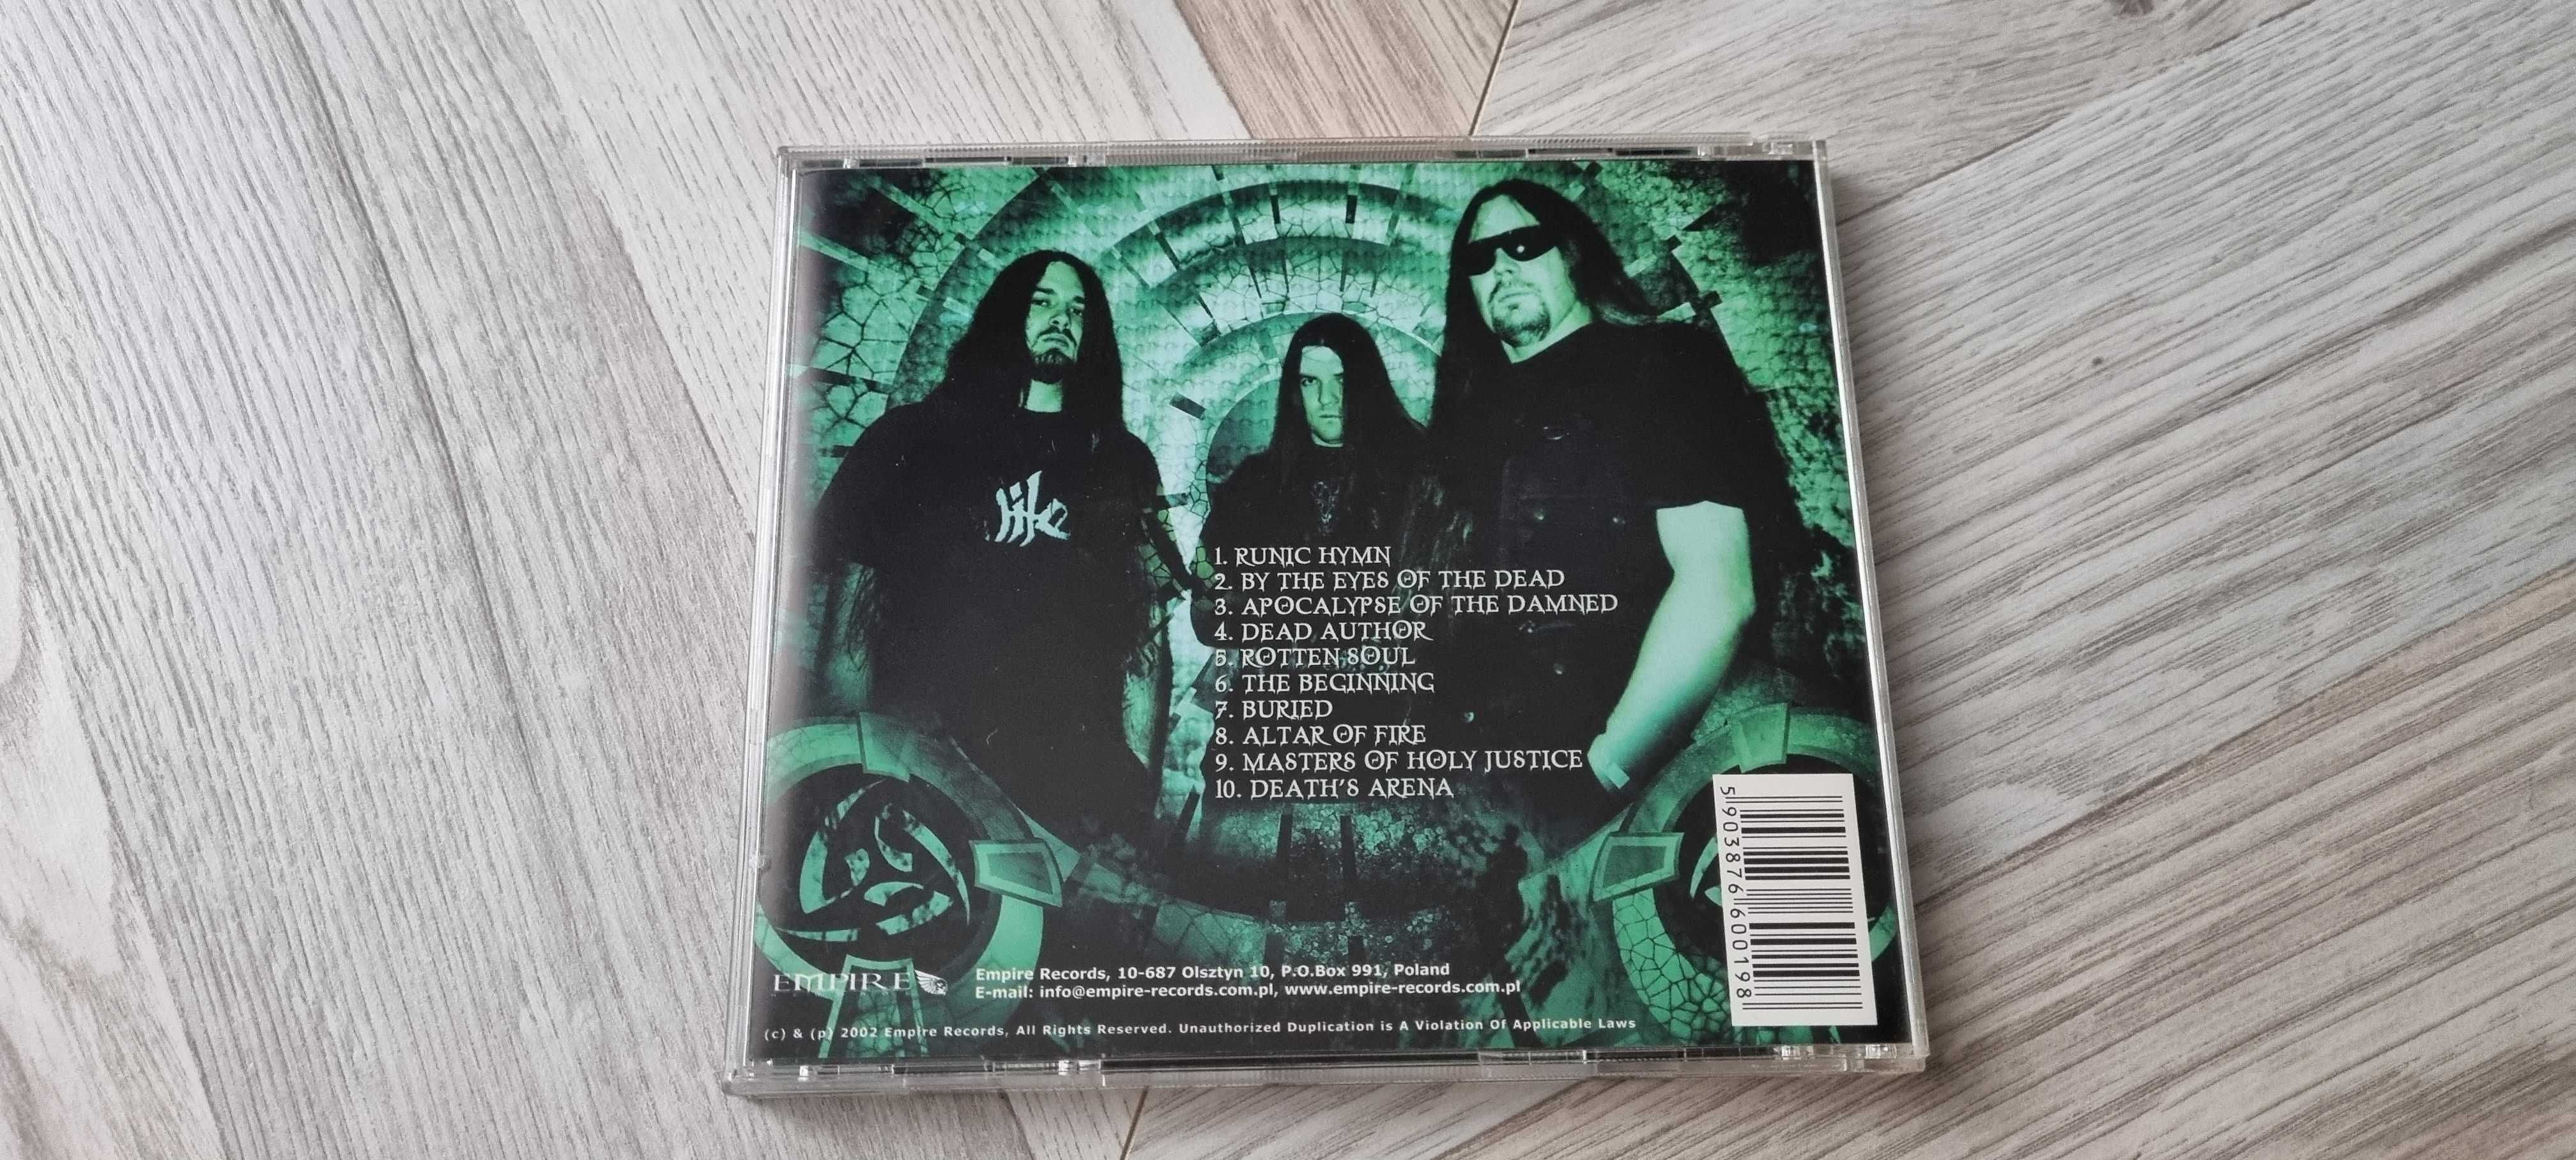 Dissenter - Apocalypse of the Damned CD